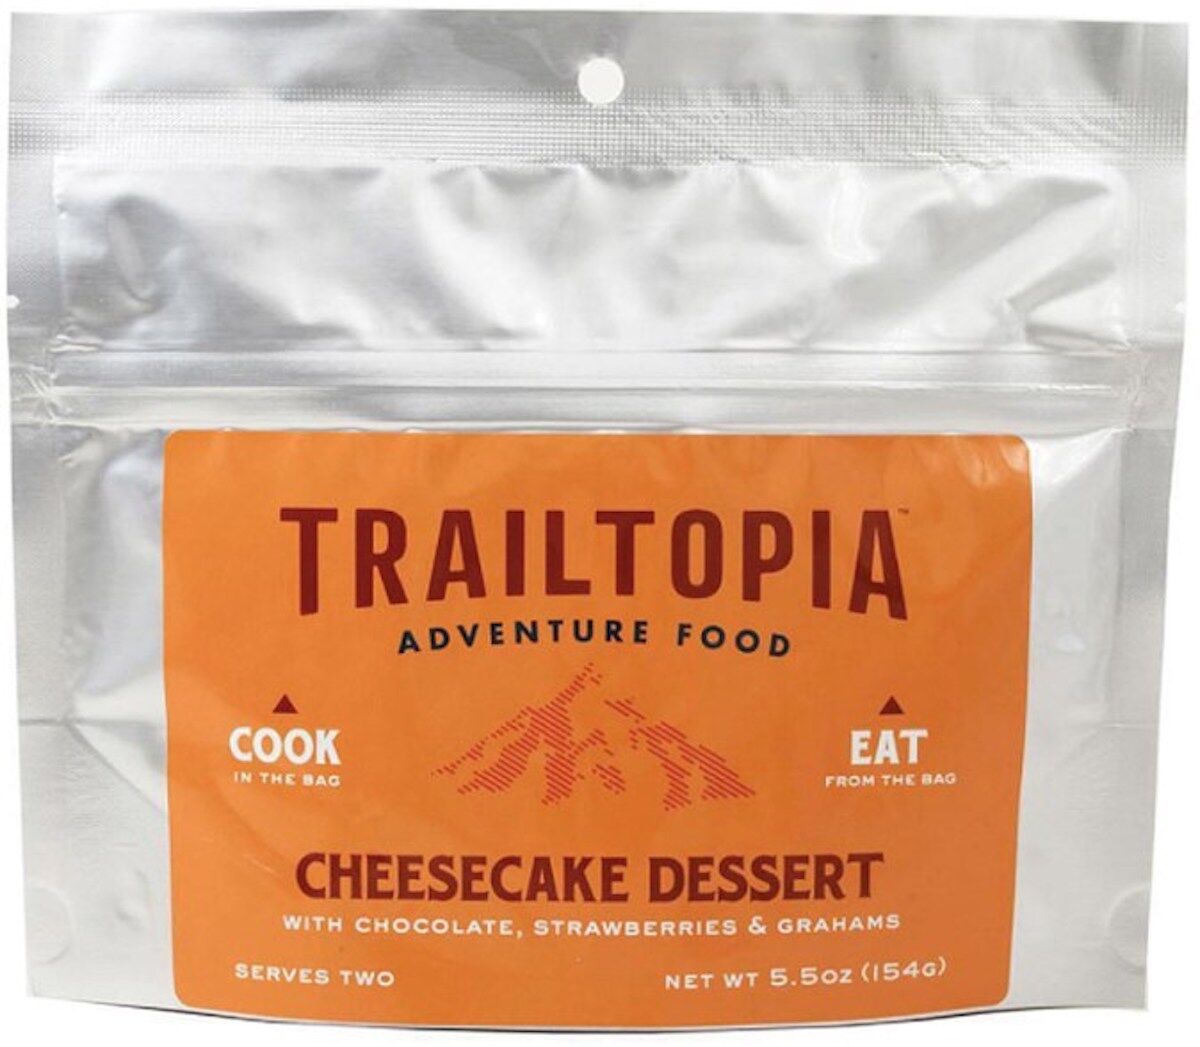 Packaging for Trailtopia Cheesecake Dessert with orange label, one of the best dehydrated meals for camping